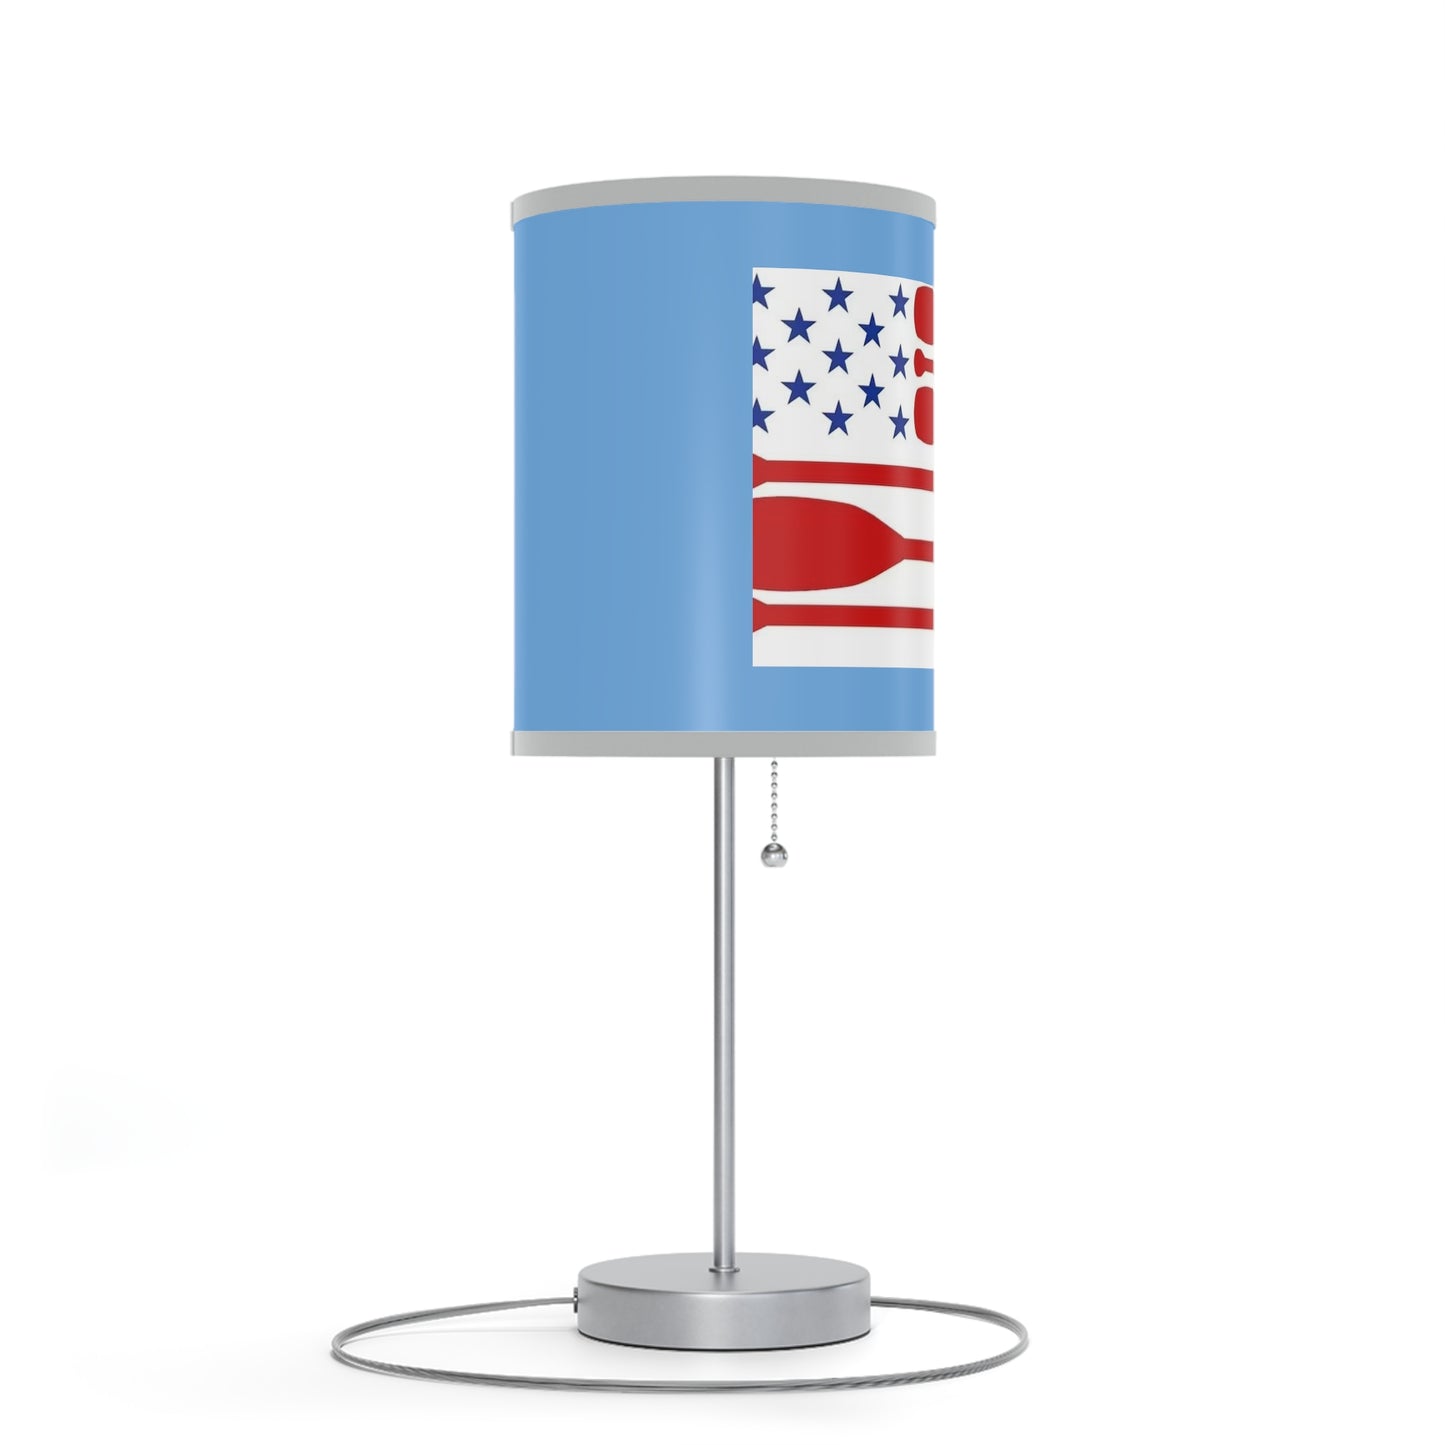 Modern Hobbit: Illuminate Your Space with Elegance and Patriotic Spirit with the Classic American Flag Design Made Using Paddles